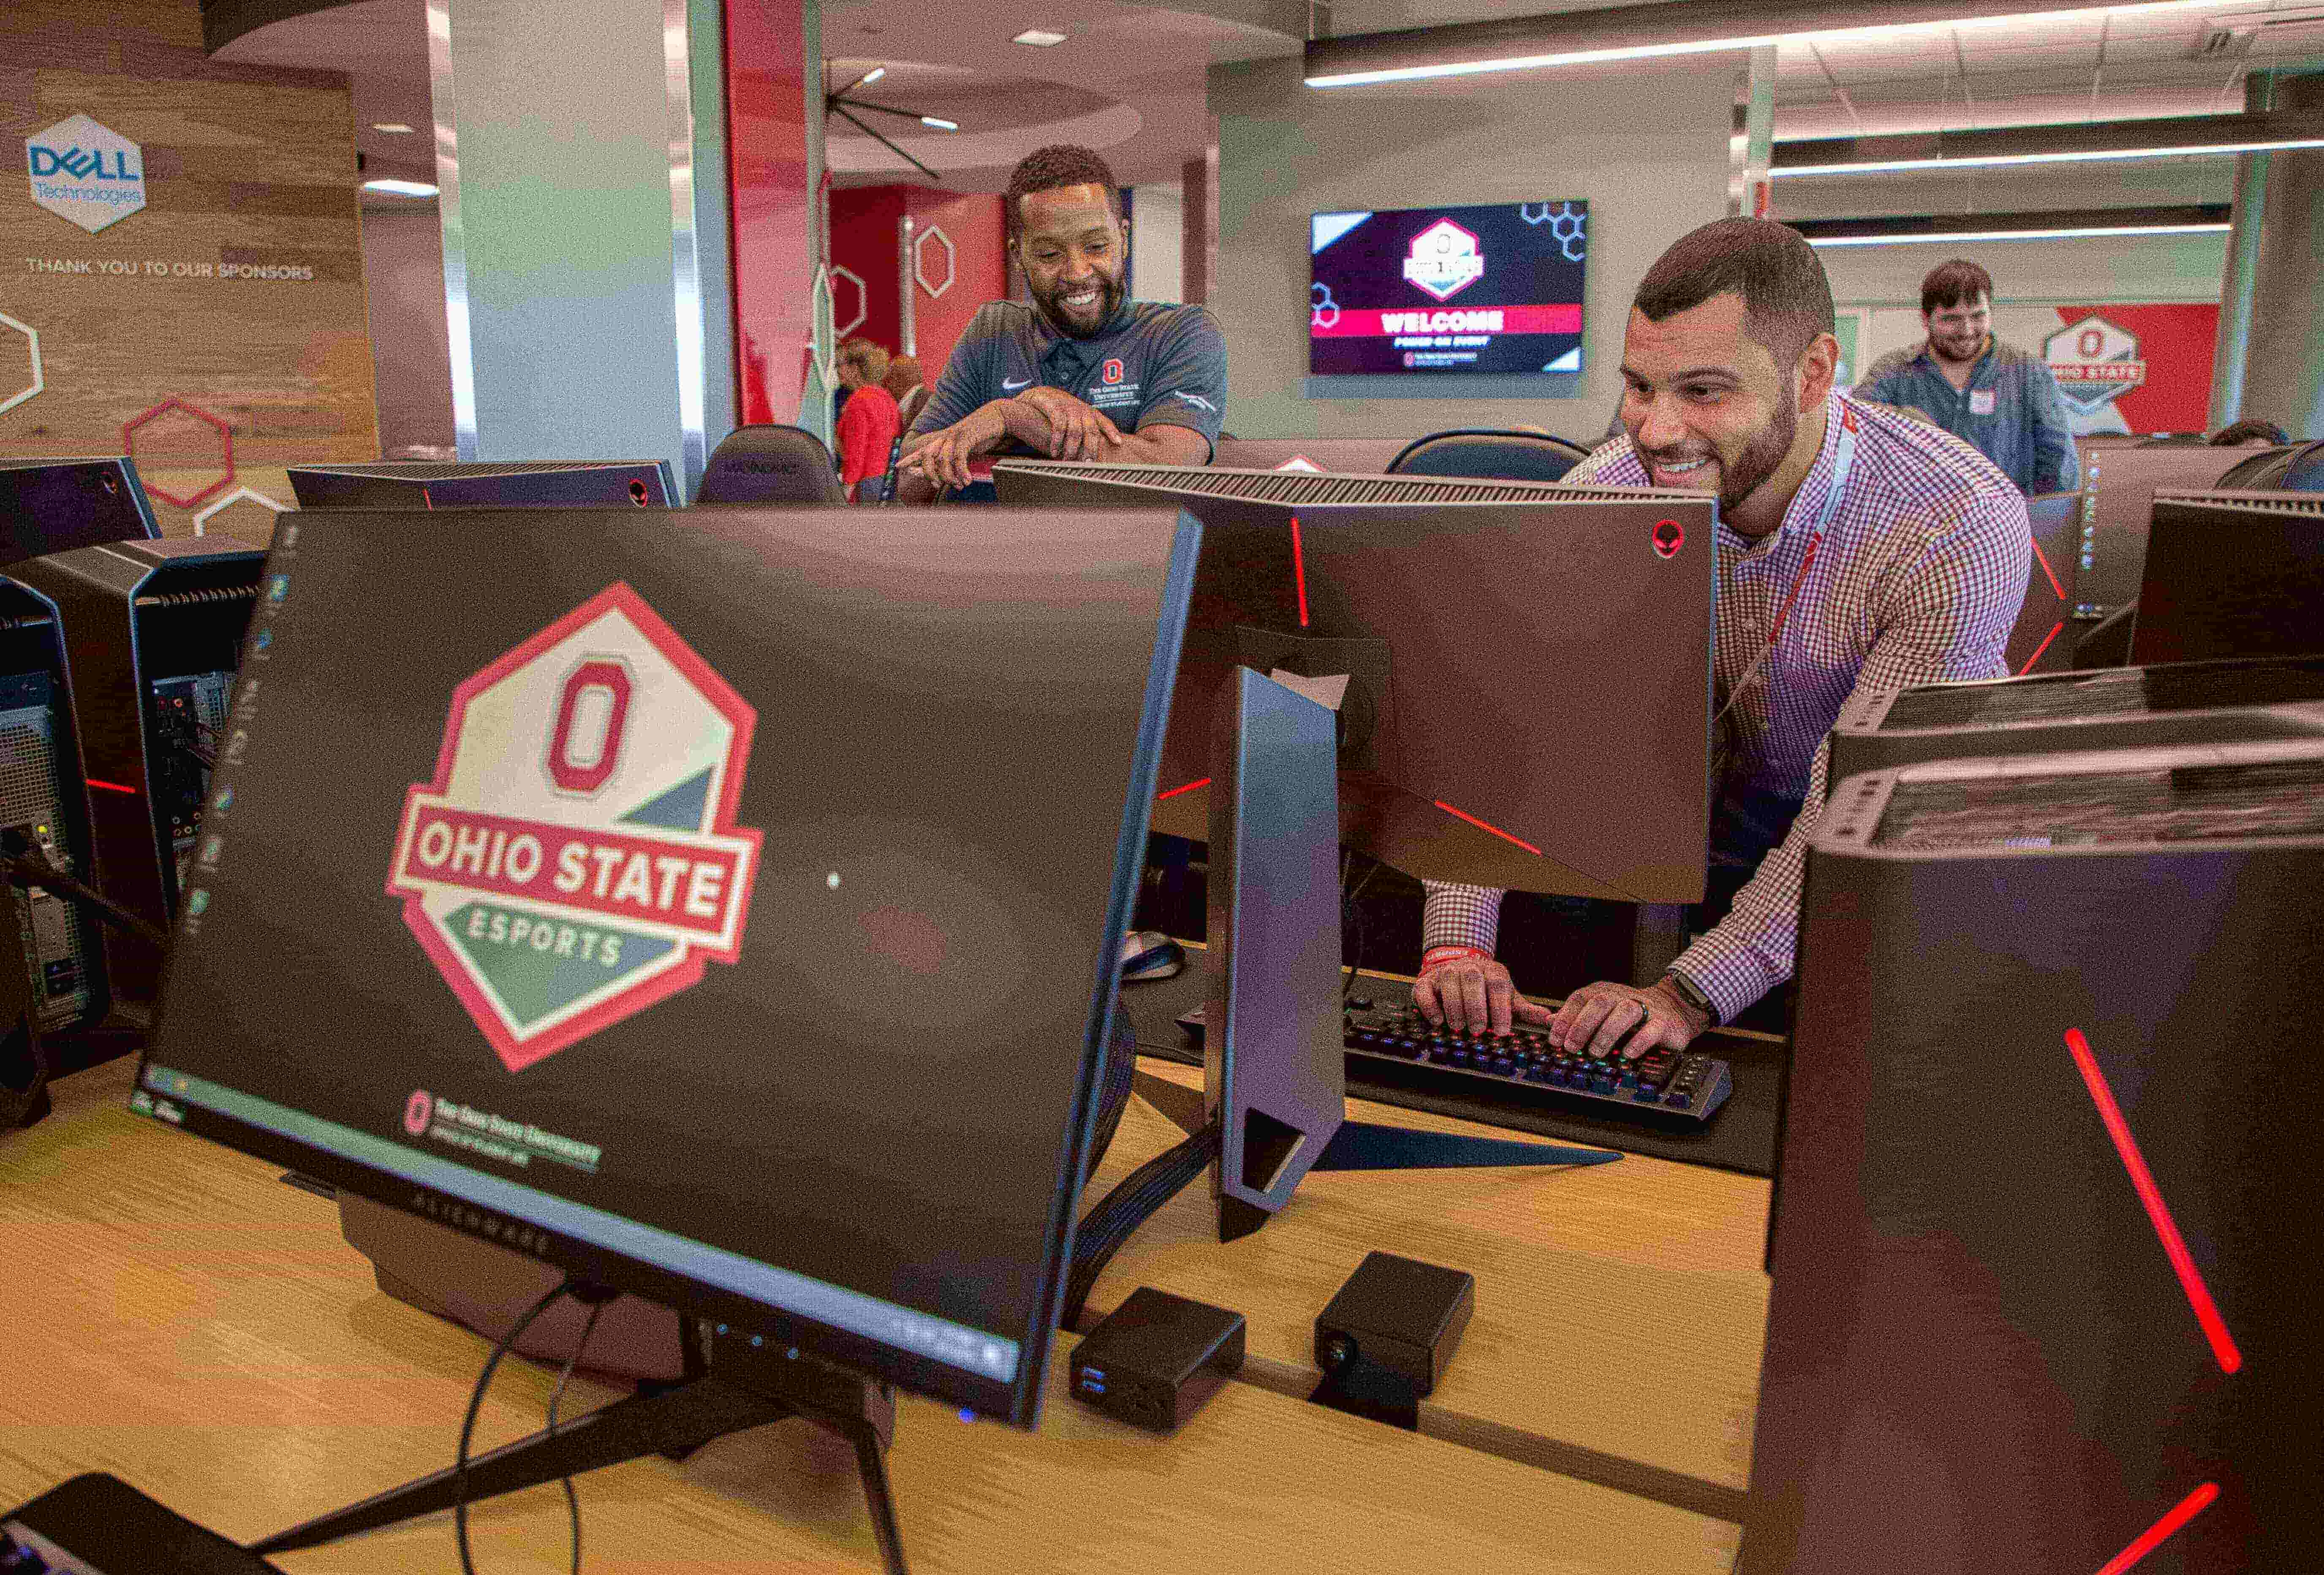 Ohio State University Esports is powered by Alienware